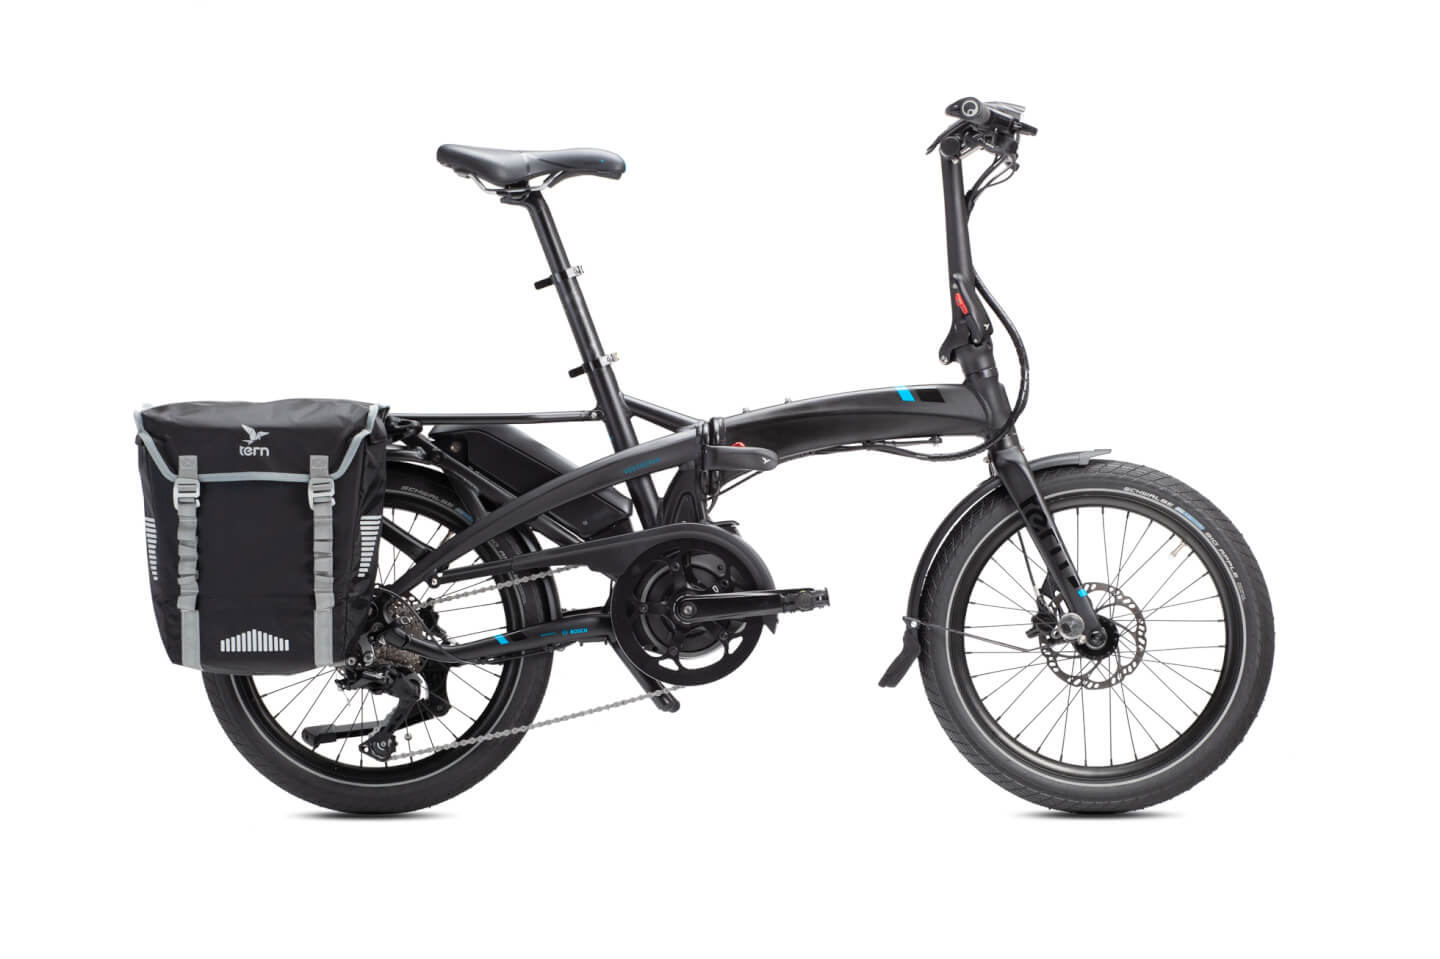 panniers for electric bikes